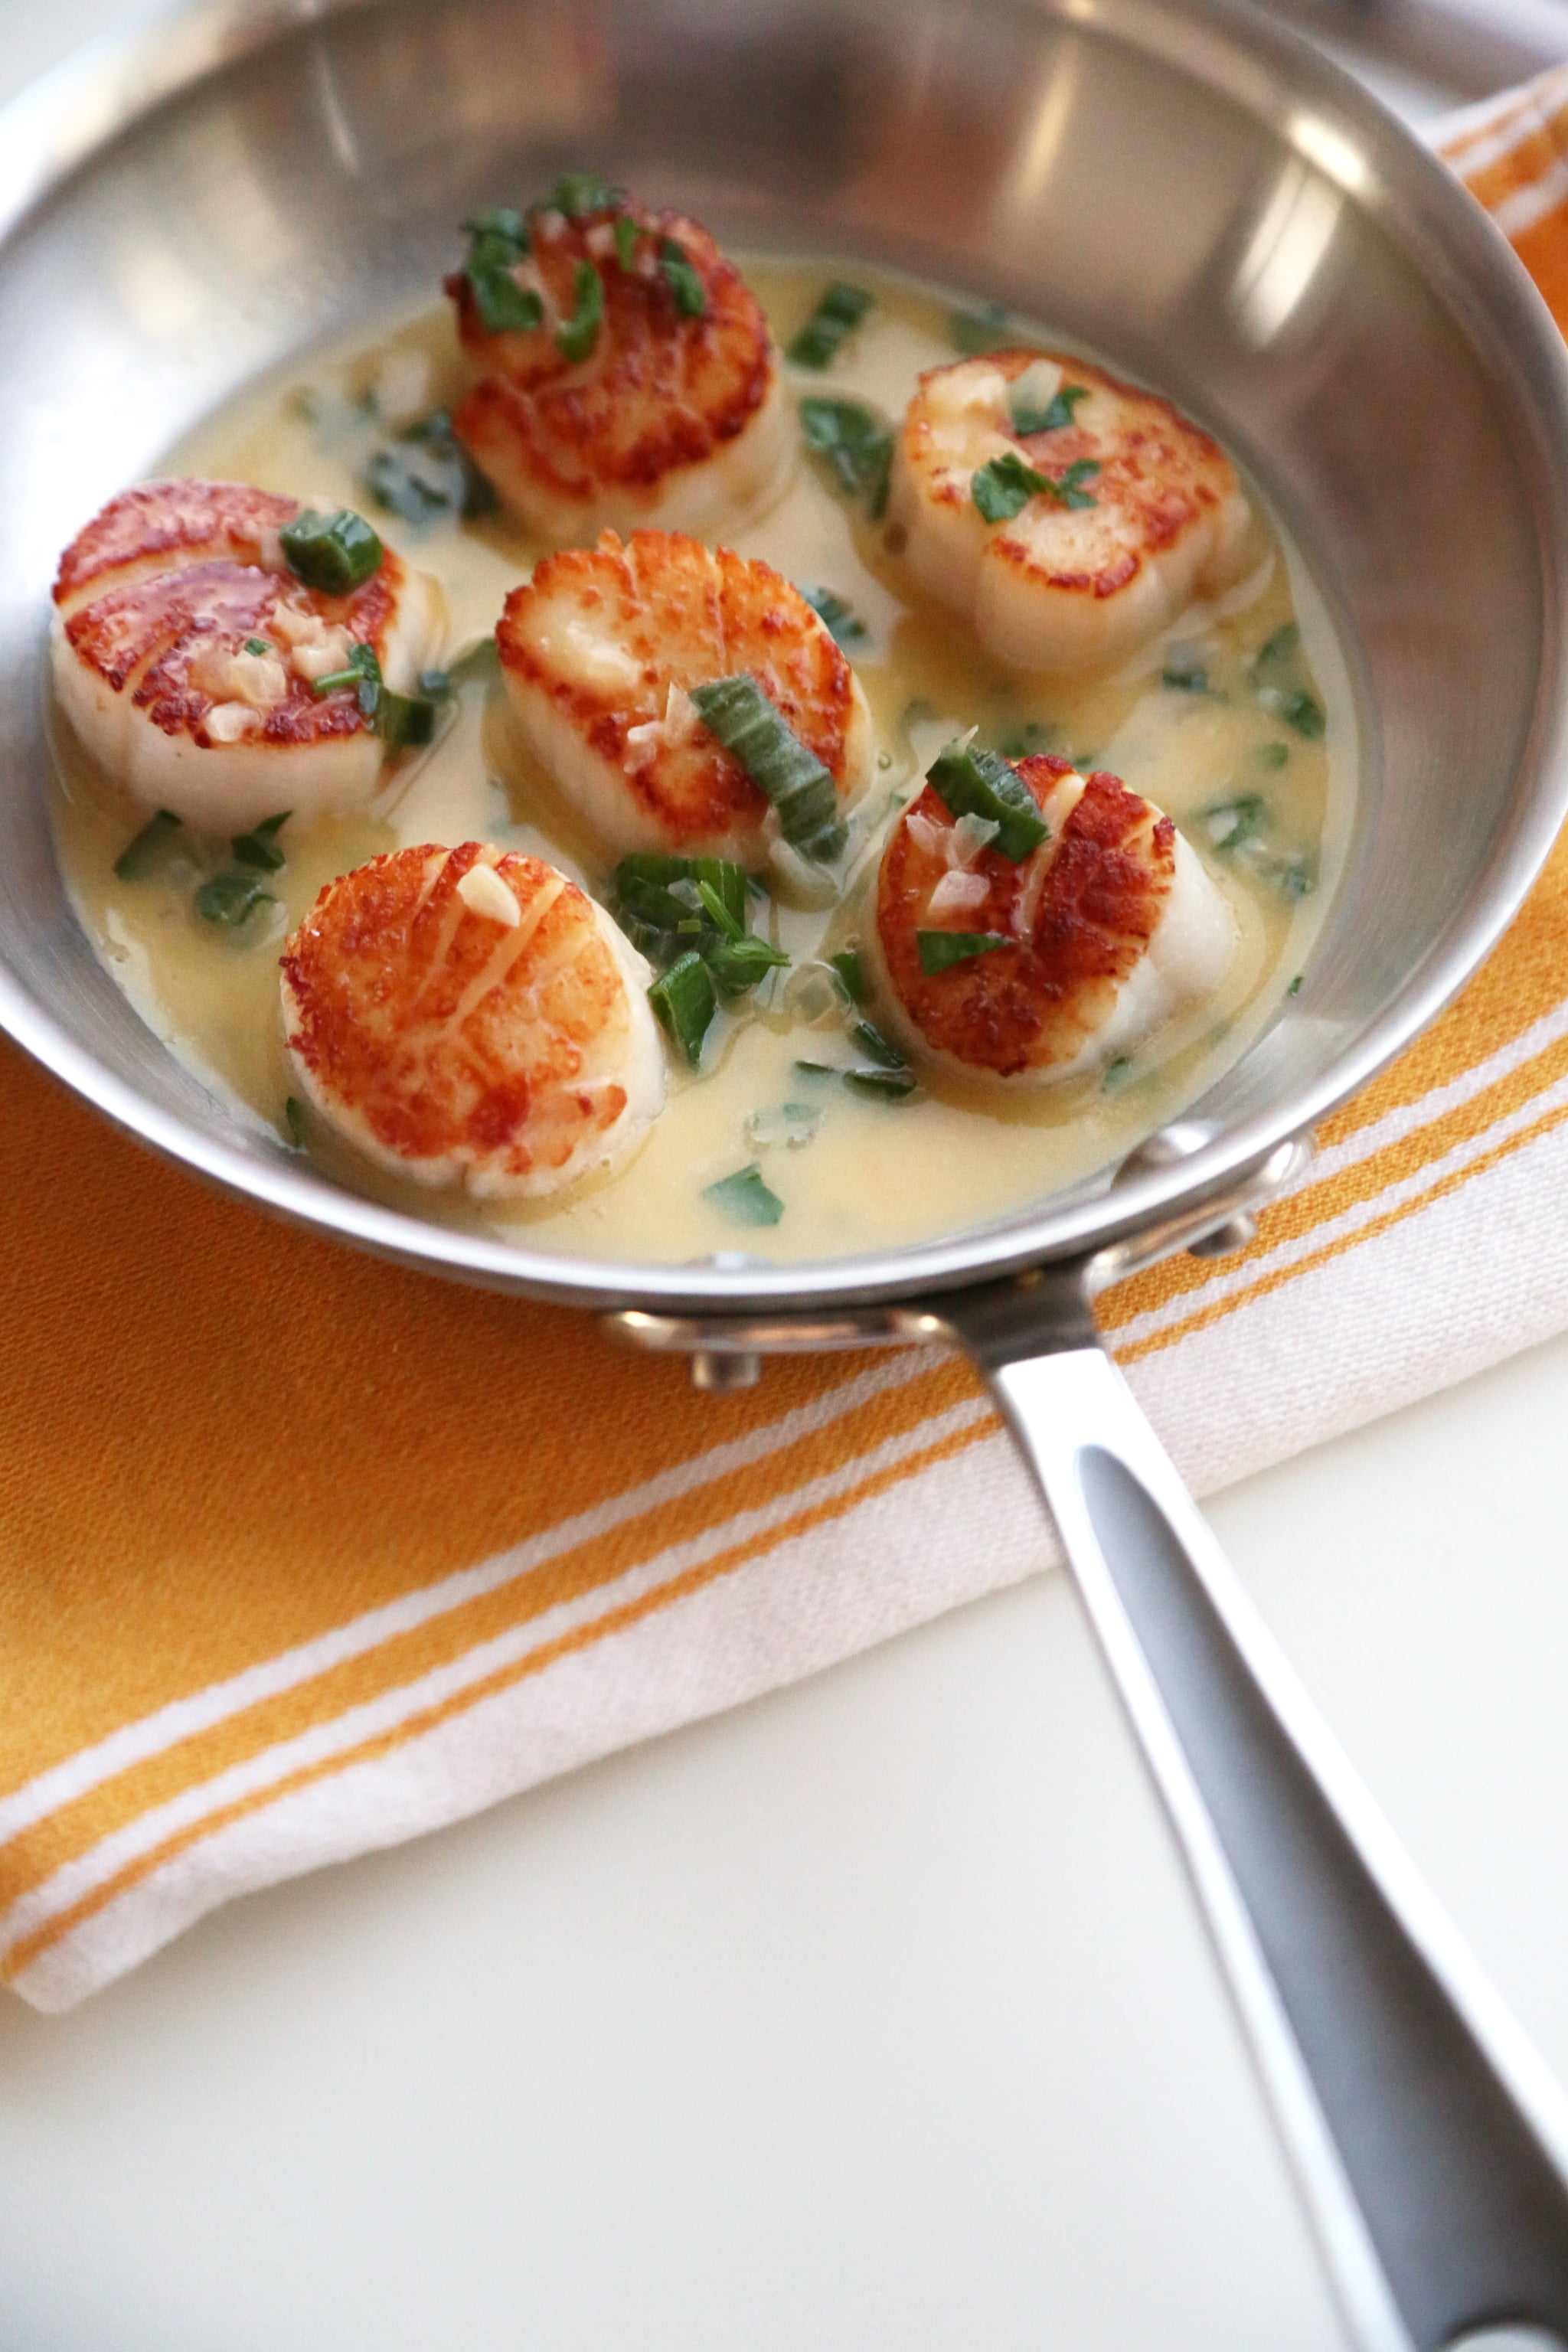 Seared Scallops in White Wine Butter Sauce | http://homemaderecipes.com/healthy/dinner/12-scallop-recipes/